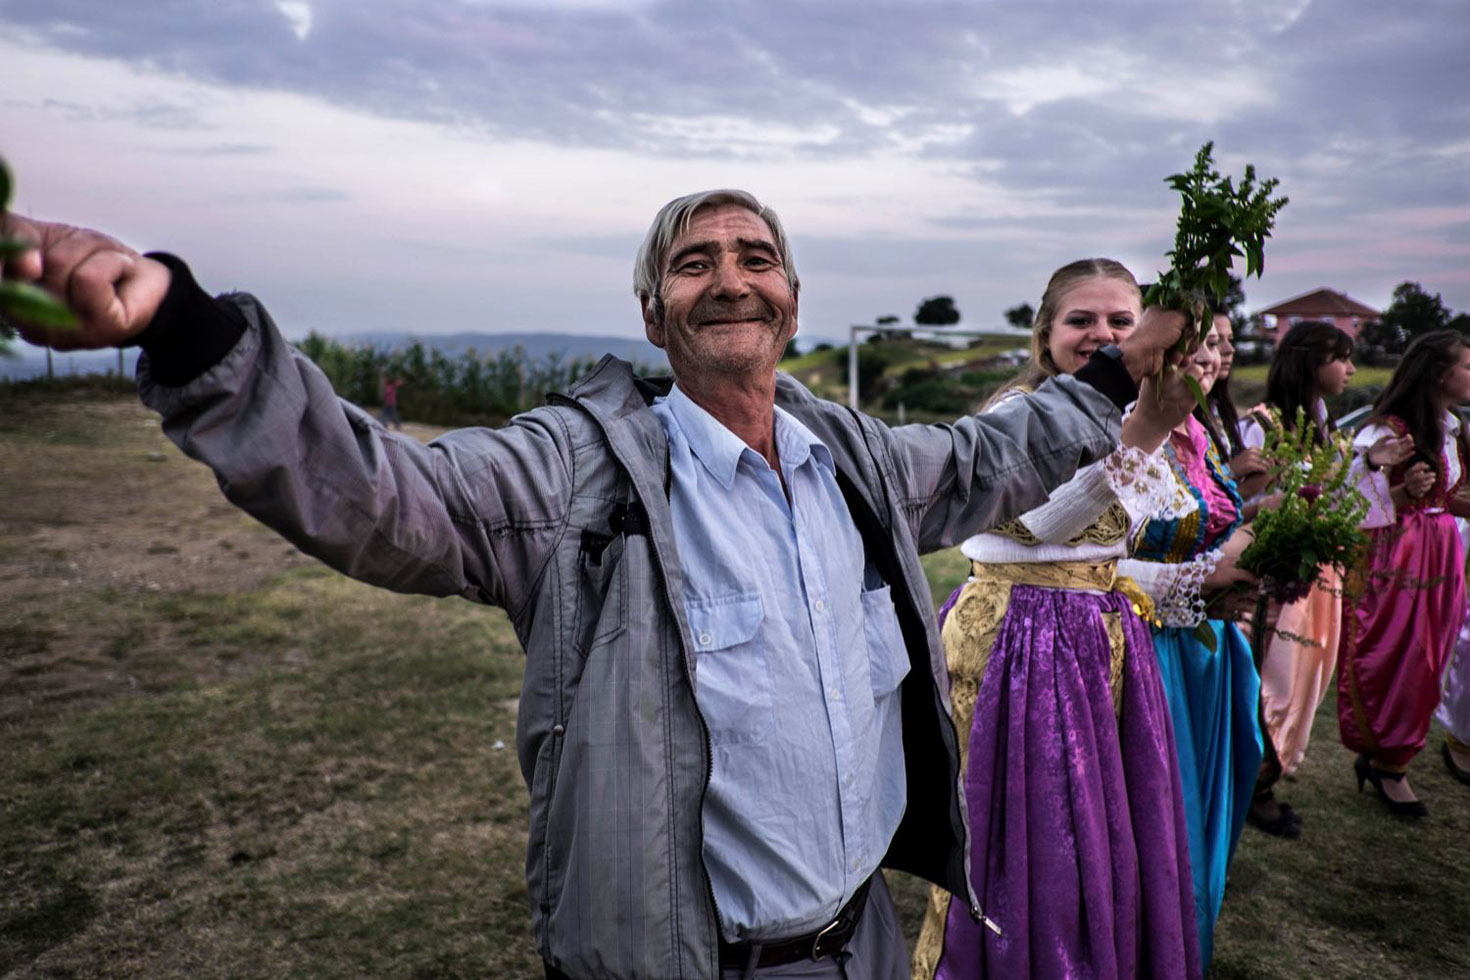 "The general socio-economic and cultural factors in the life of this Yörük community, from the past to the present, have preserved it as a particular Turkish ethnic community with certain language, folkloric and custom characteristics."